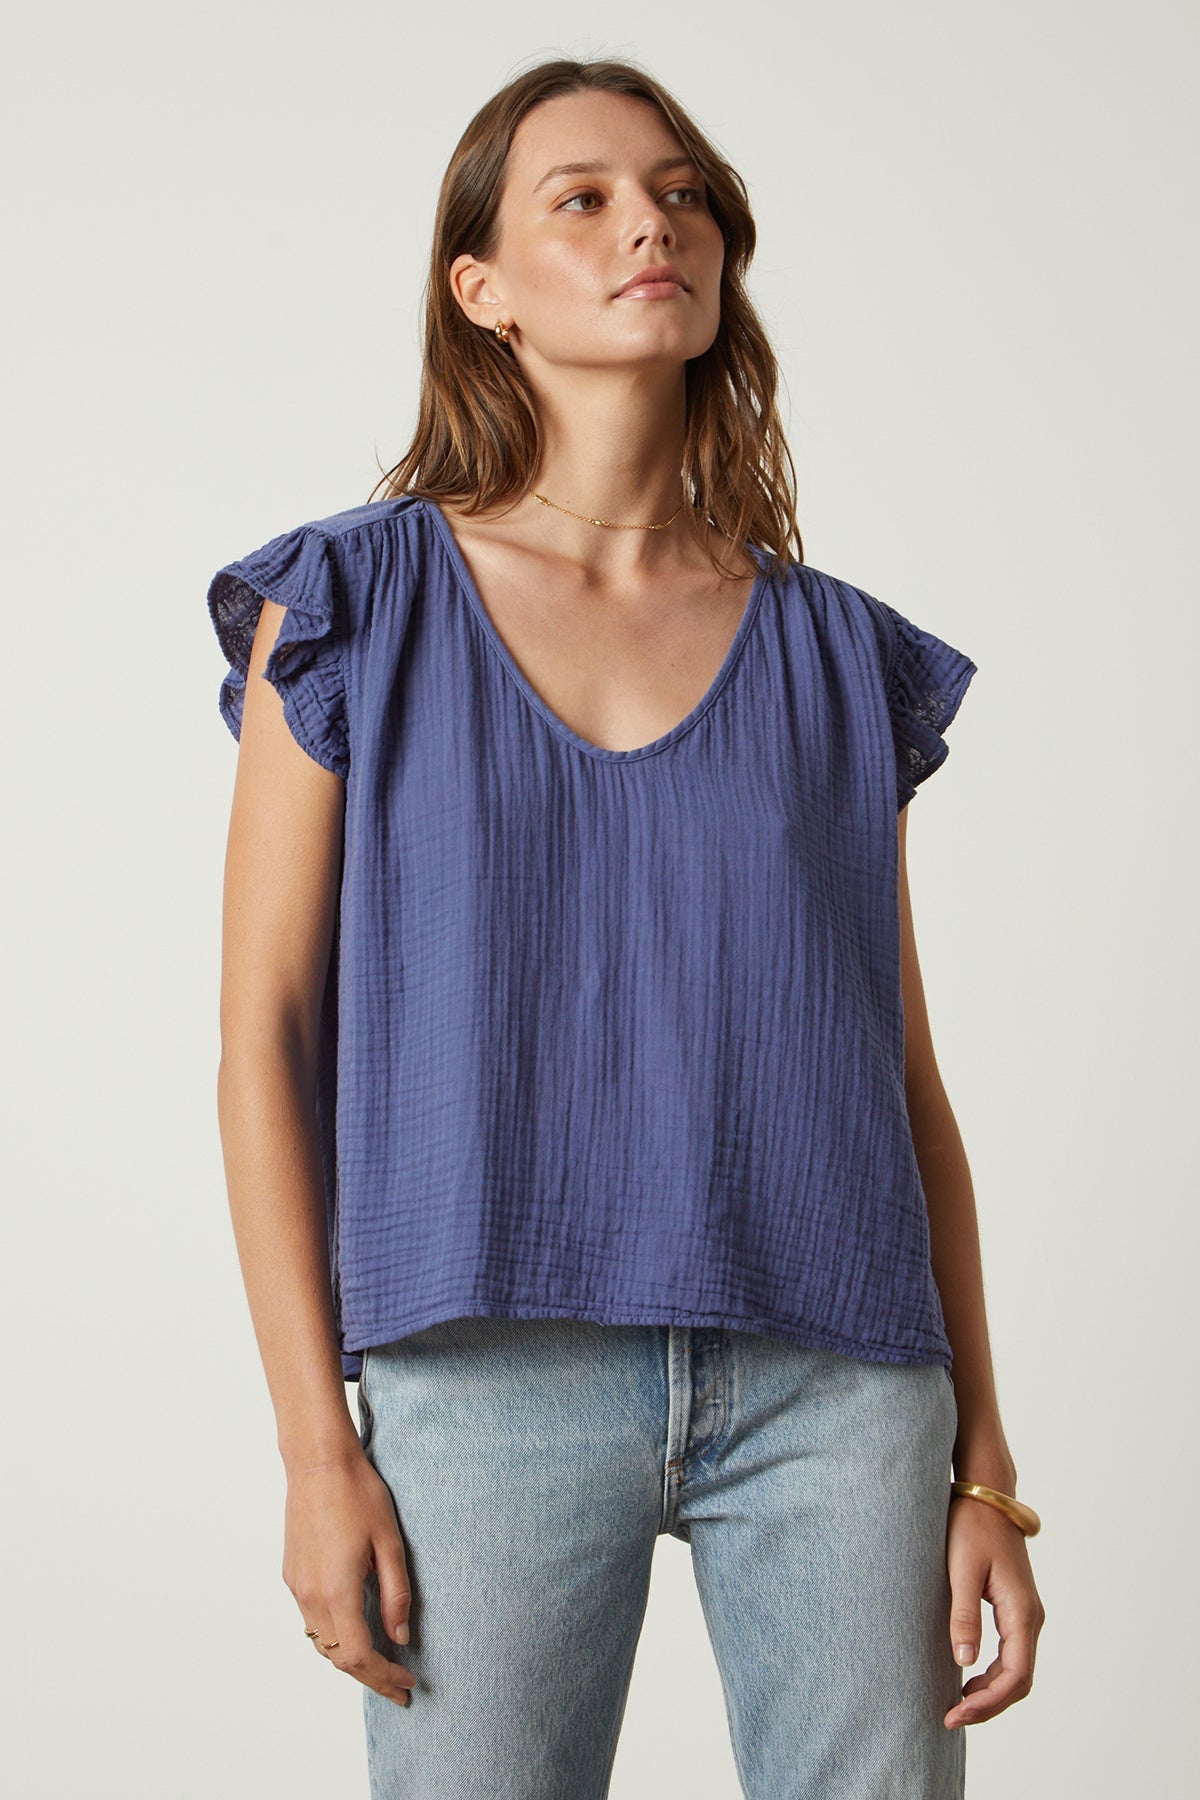 the REMI RUFFLE SLEEVE TOP in blue by Velvet by Graham & Spencer.-26631974224065